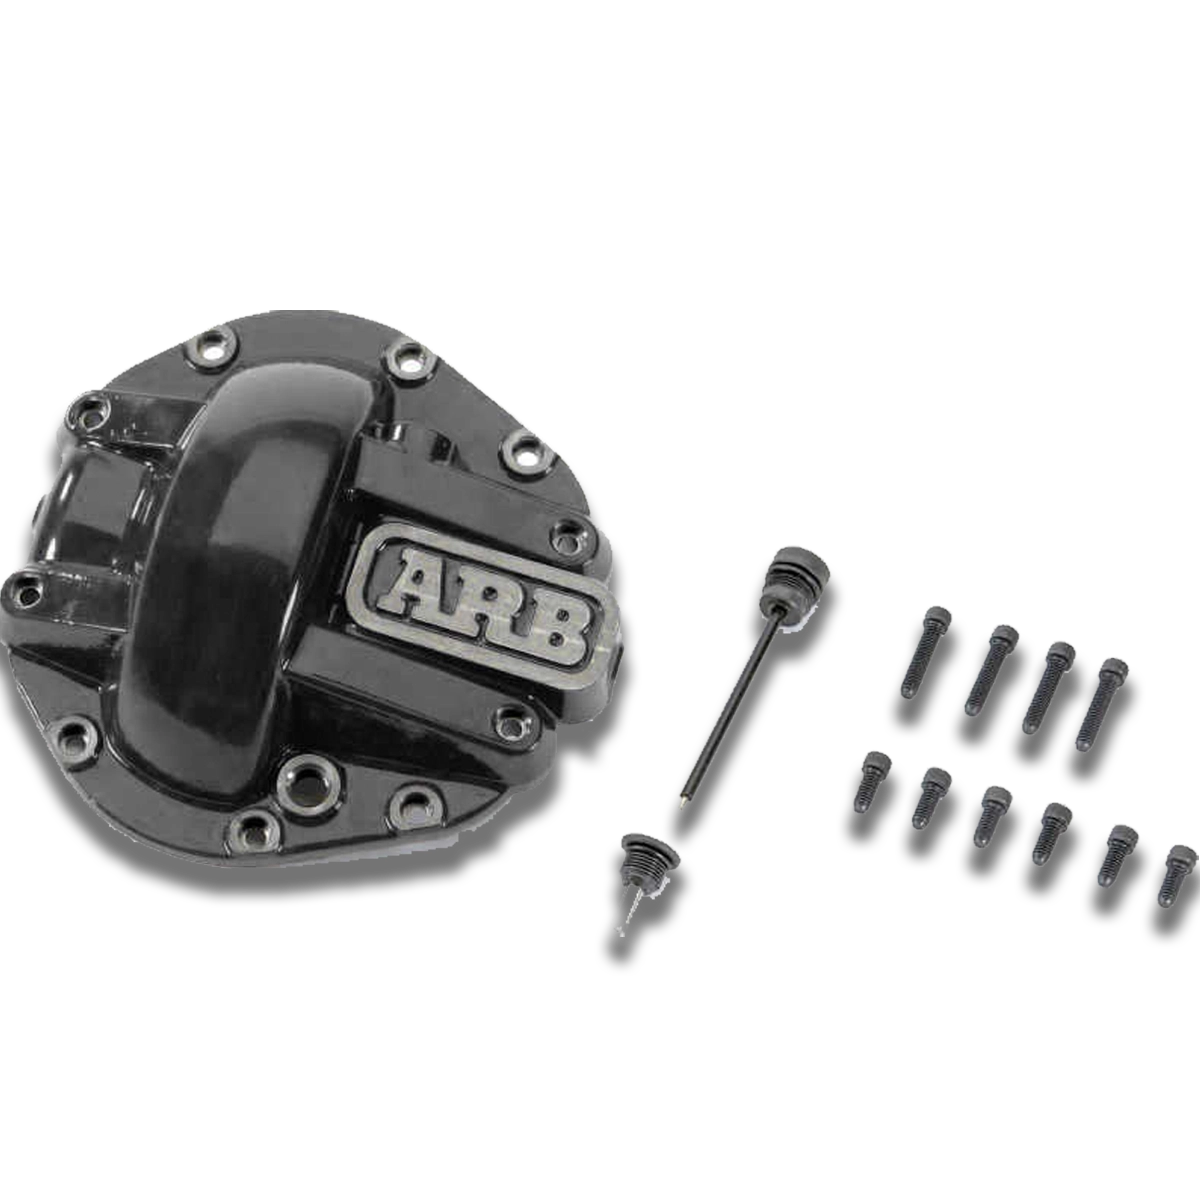 ARB Differential Cover (Black) for Dana 44 Axle